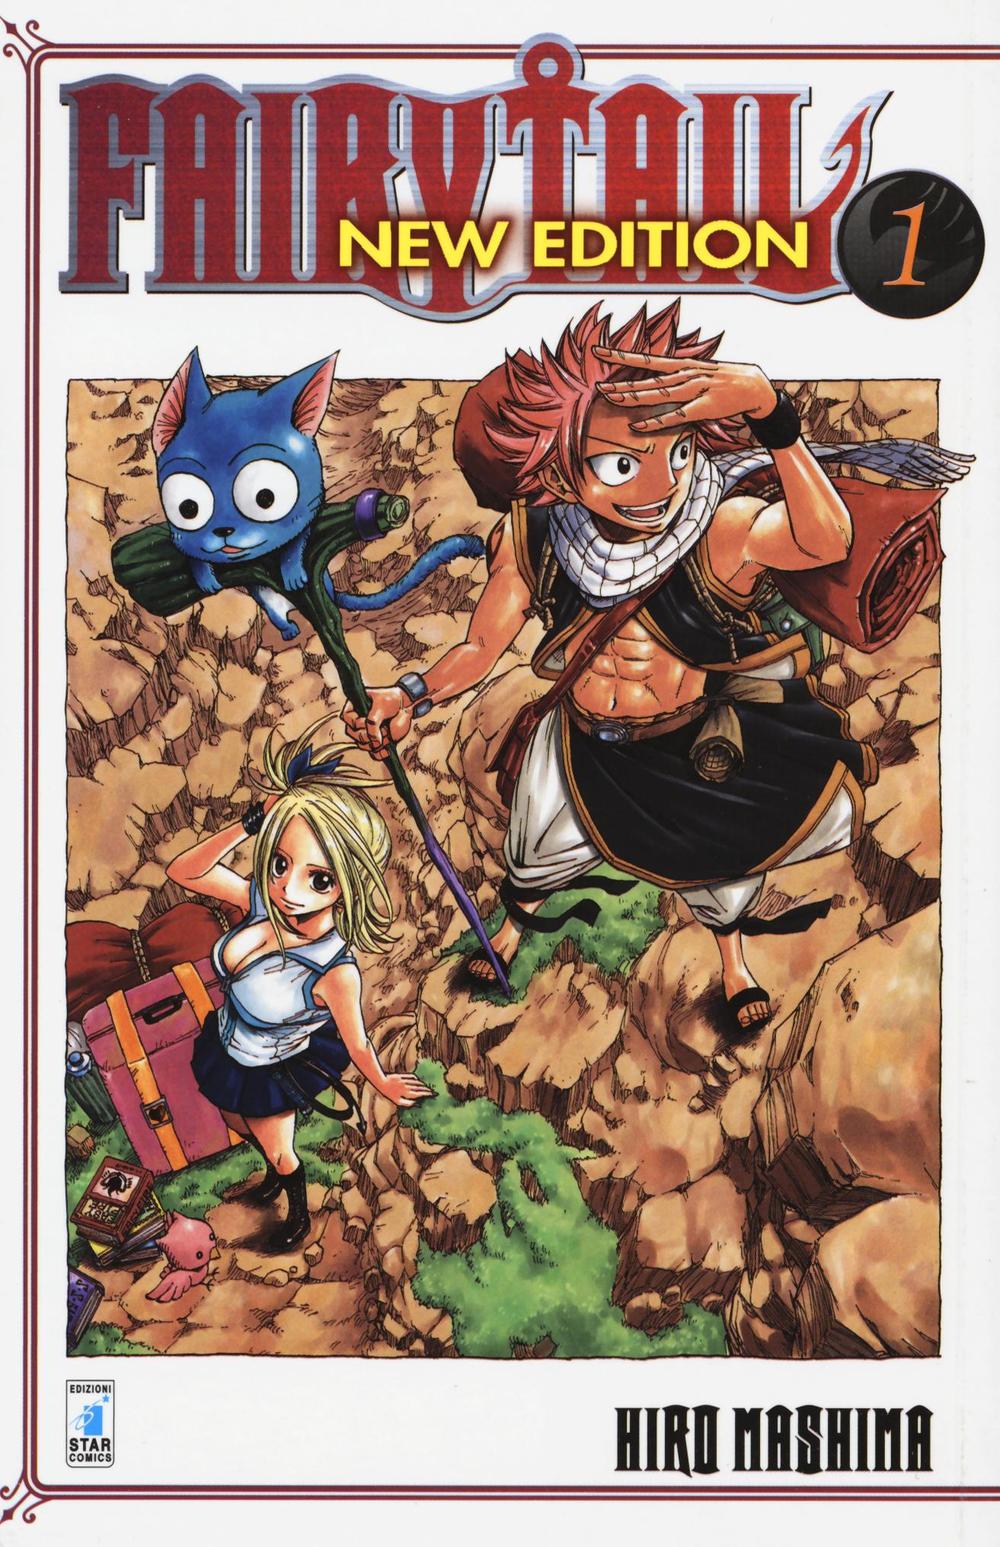 Fairy Tail. New edition. Vol. 1.